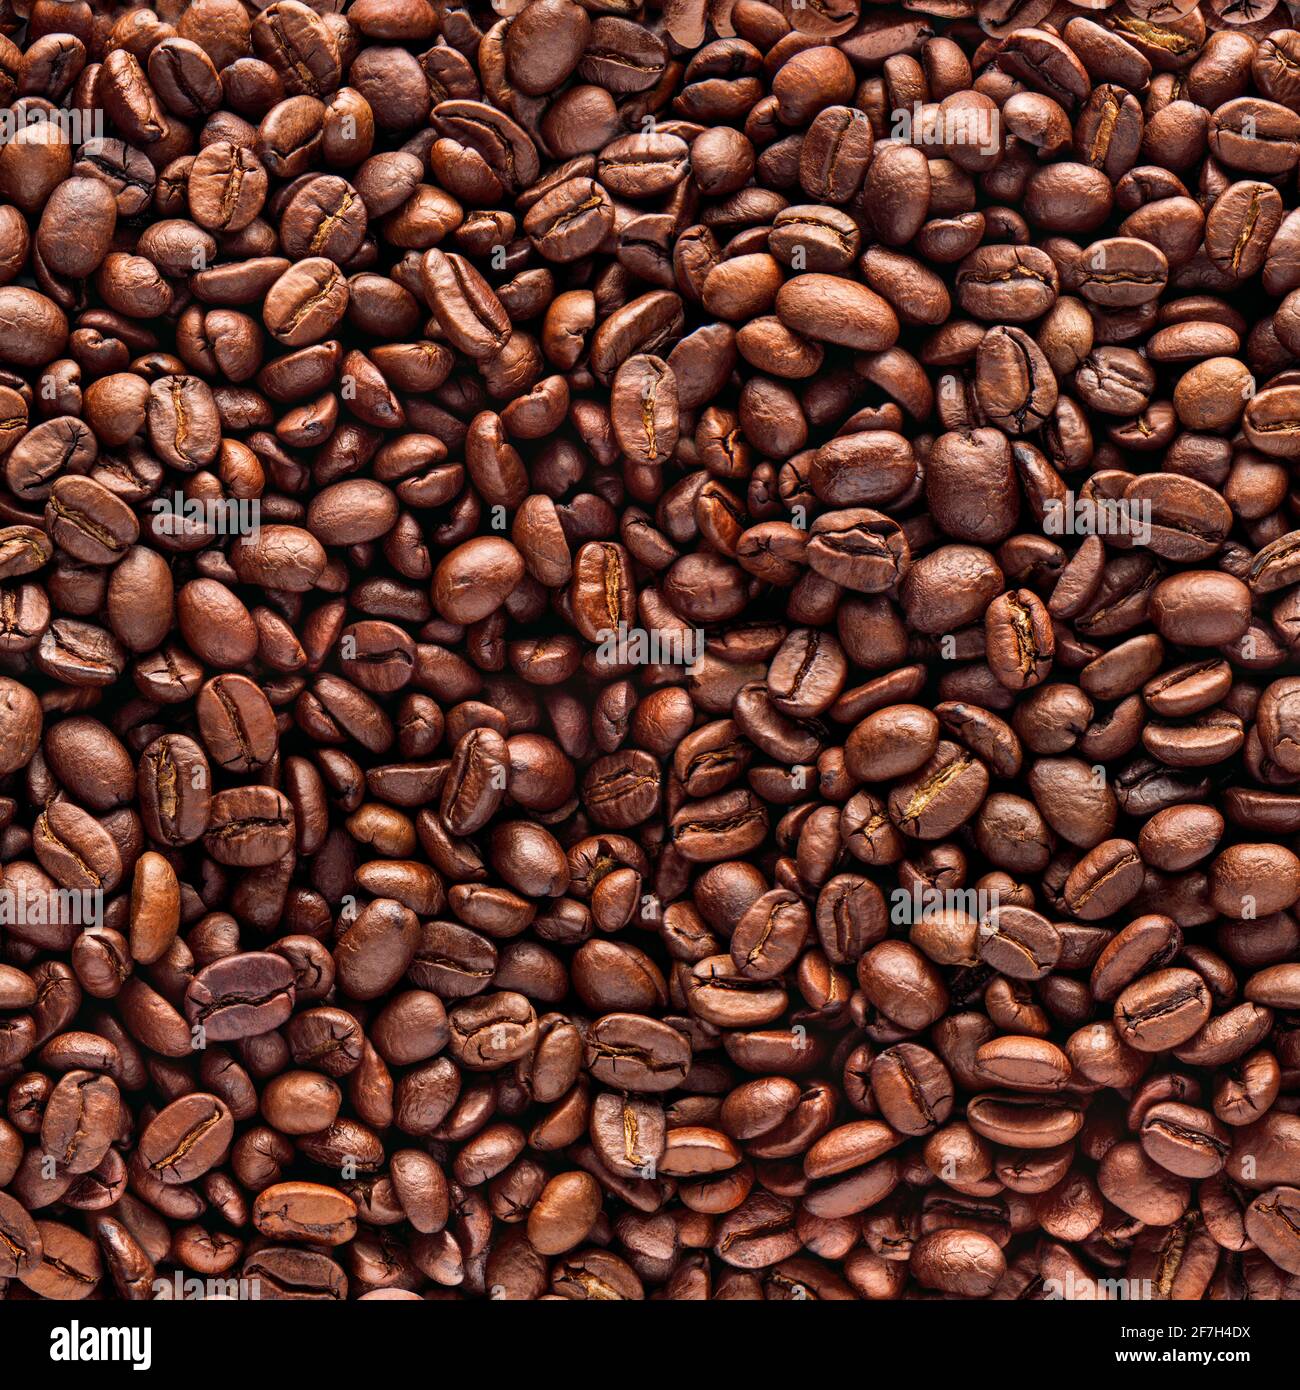 Coffee beans seamless background. Top view Stock Photo